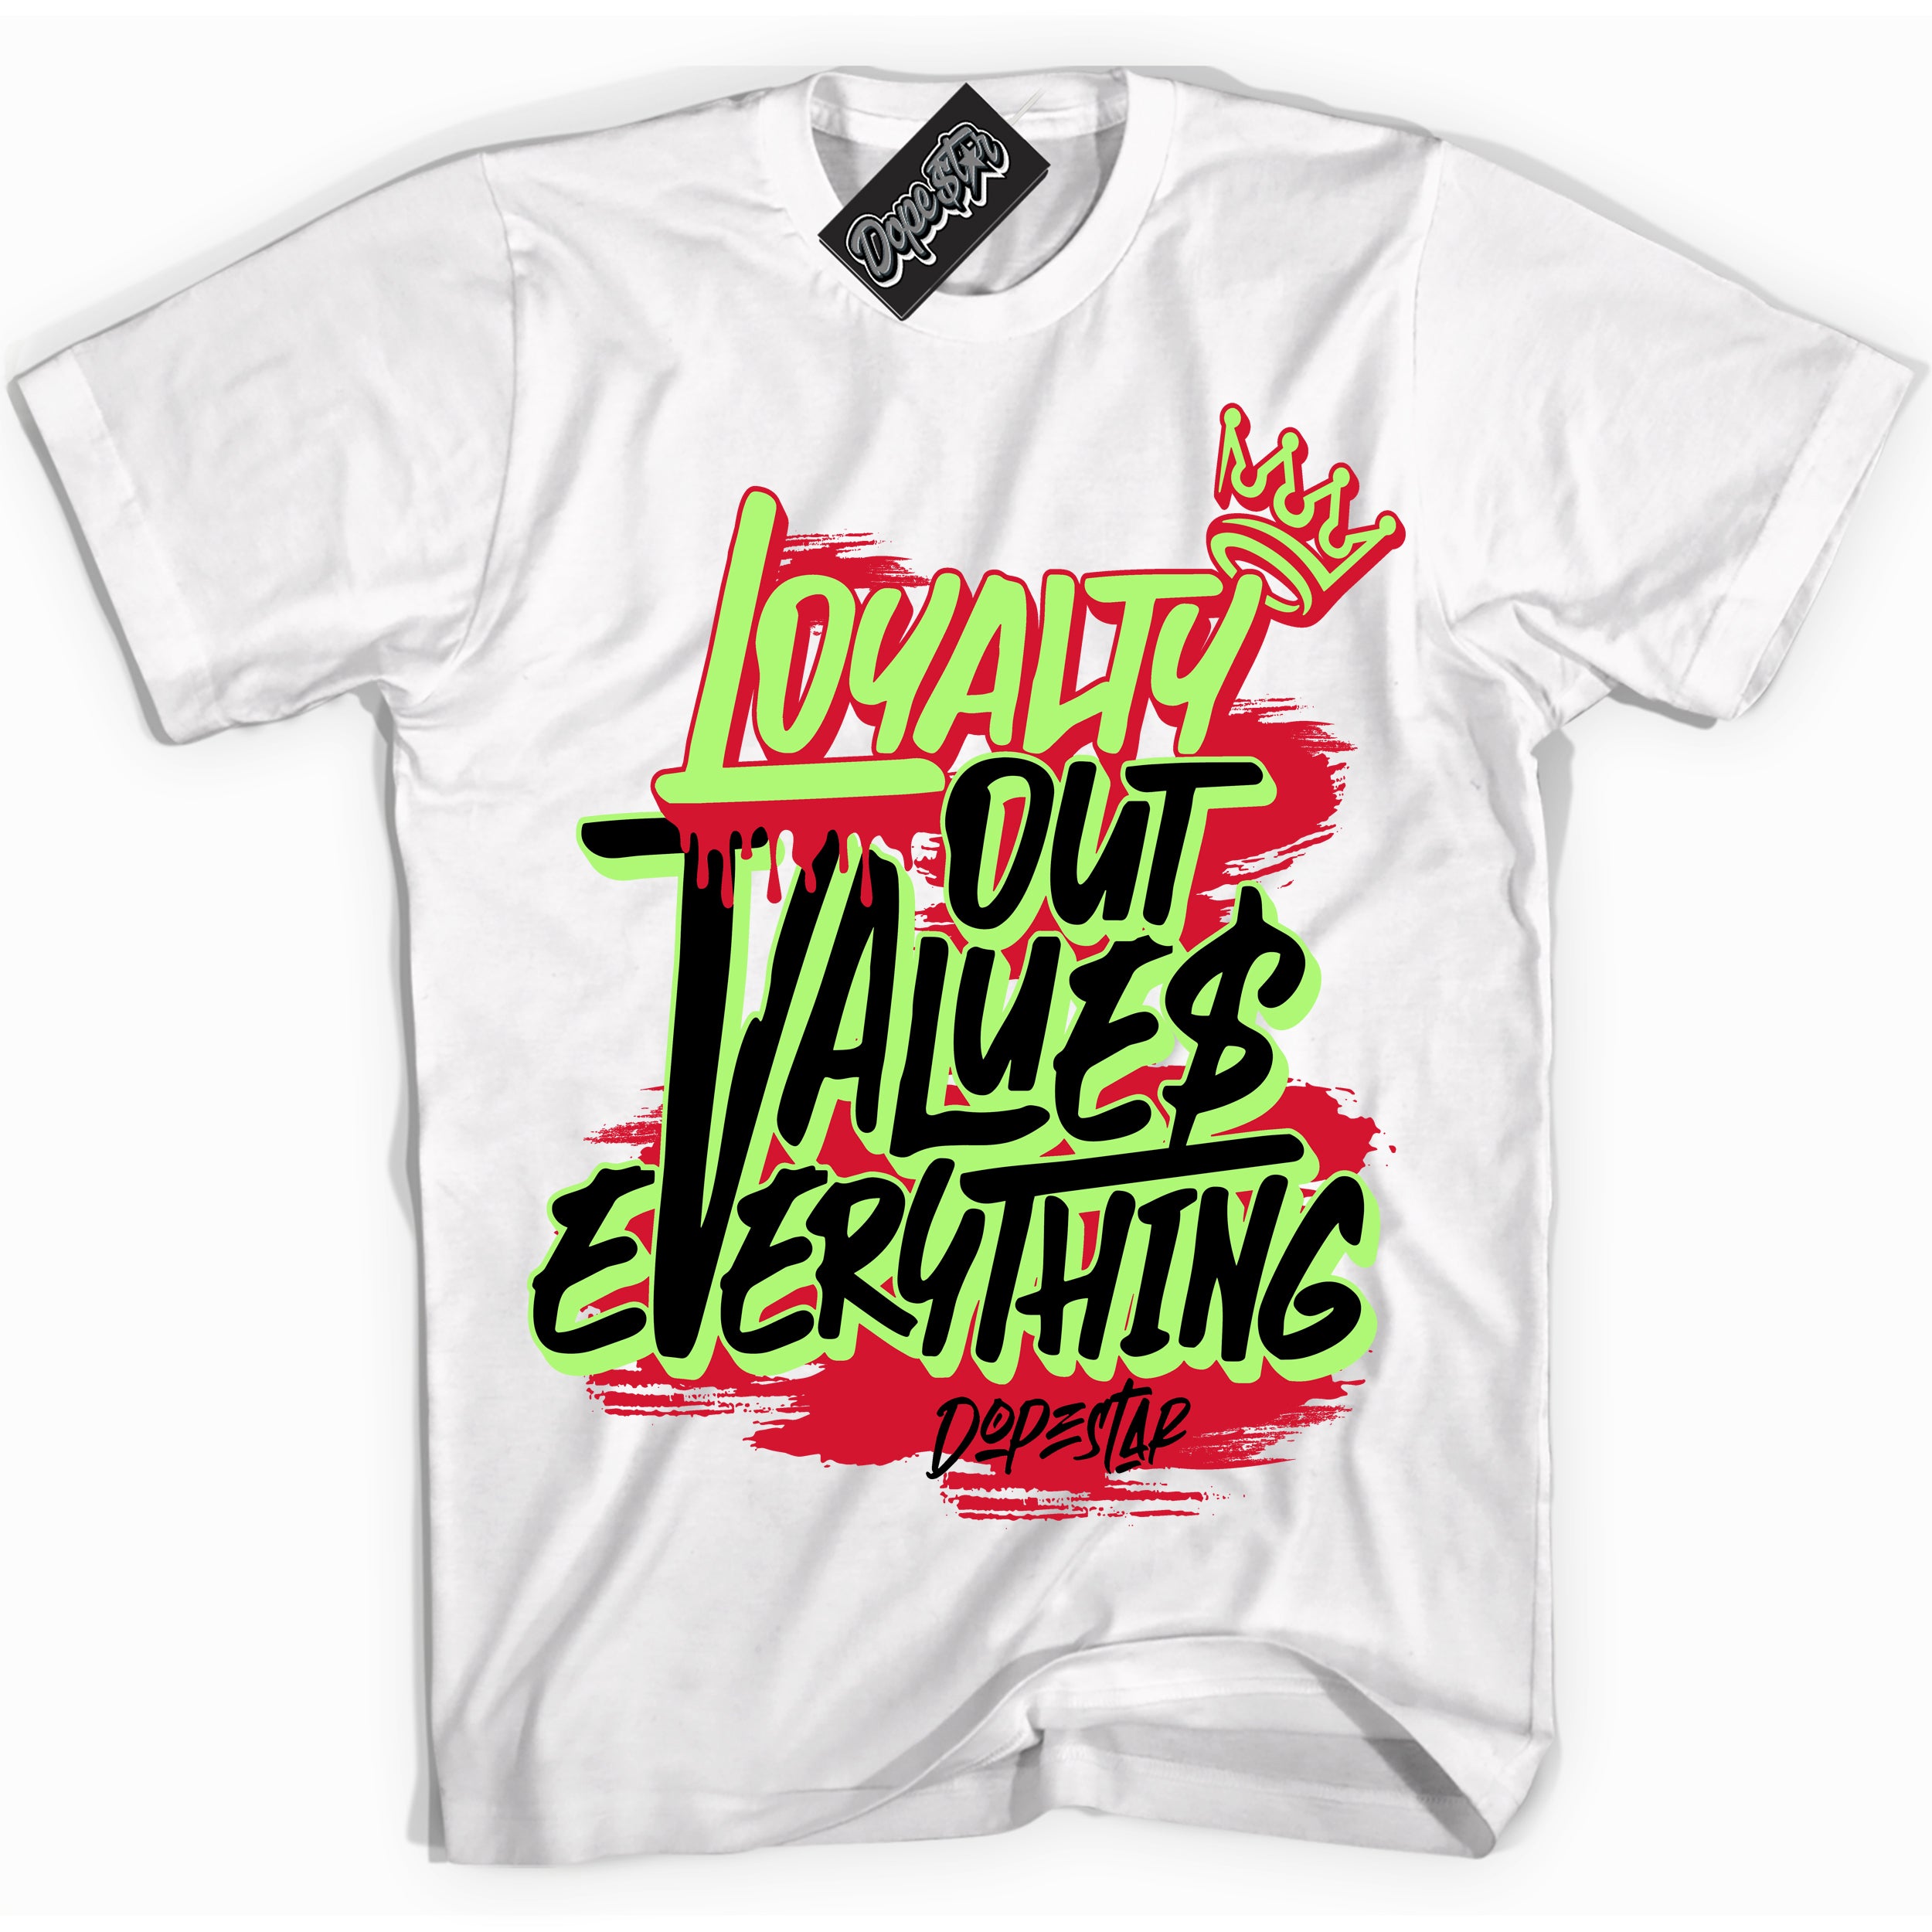 Cool White Shirt with “ Loyalty Out Values Everything” design that perfectly matches Reverse Grinch 6s Sneakers.